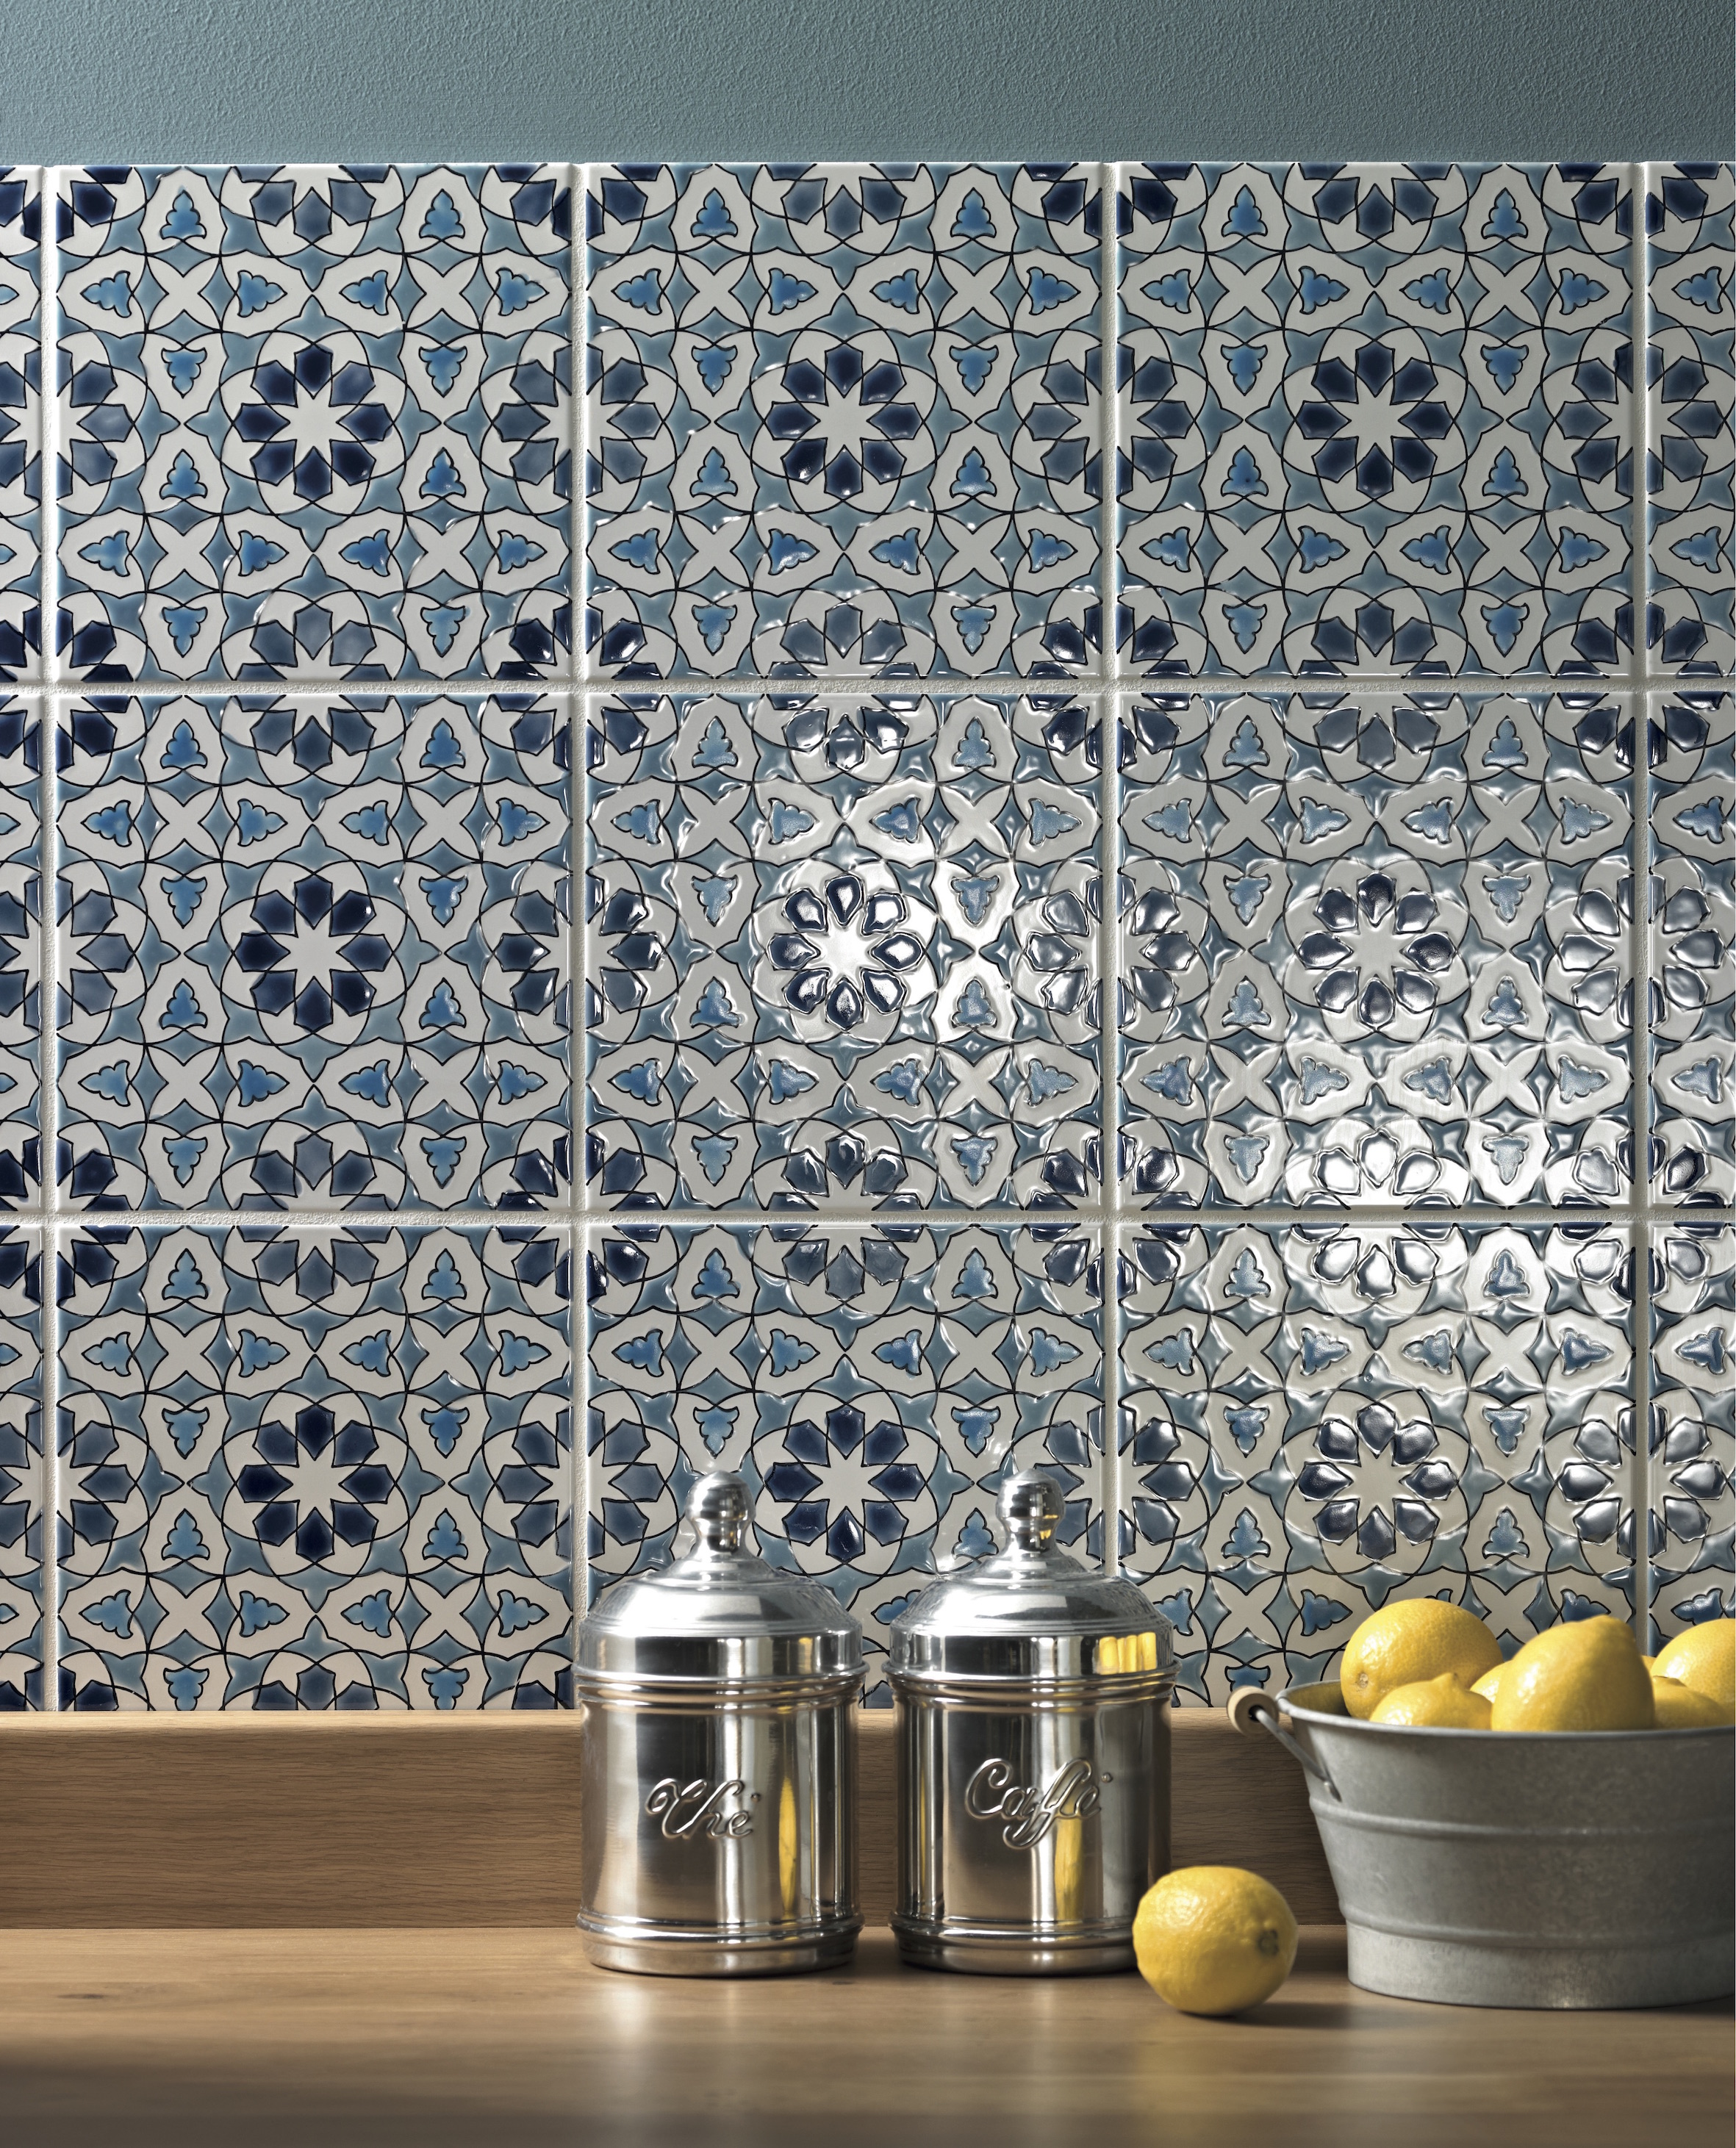 6 top tips for choosing the perfect kitchen tiles - BT